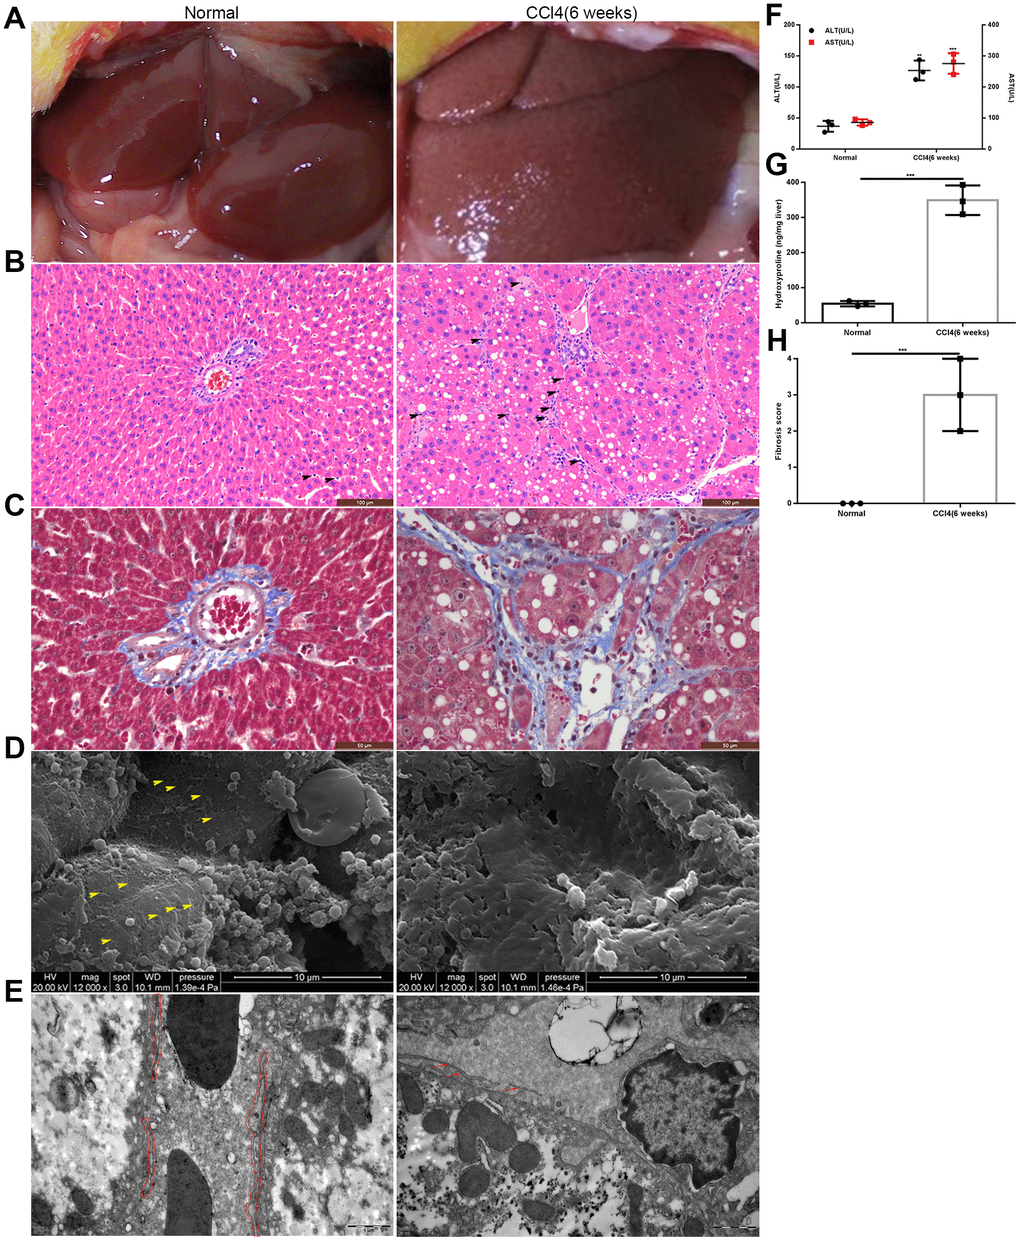 Establishment of the rat model of liver fibrosis. (A) General appearance of liver in the model group and the normal control group. (B, C) HE and Masson staining of liver tissues from the model group and normal control group: inflammatory cells accumulated in the hepatic sinusoids and collagen fibers deposited in the space of Disse (the black head of arrow indicates infiltrating lymphocytes). (D) SEM: defenestration changes in the model group compared with those in the normal control group (the yellow head of arrow indicates fenestrae). (E) TEM: formation of a basement membrane in the model group compared with that in the normal control group (the red irregular area in the normal control group indicated LSECs; and in the model group, the red arrow showed the discontinuous basement membrane). (F) Transaminase levels in the model group and the normal control group. (G) Hydroxyproline content in the model group and the normal control group. (H) Liver fibrosis score in the model group and the normal control group. **p 